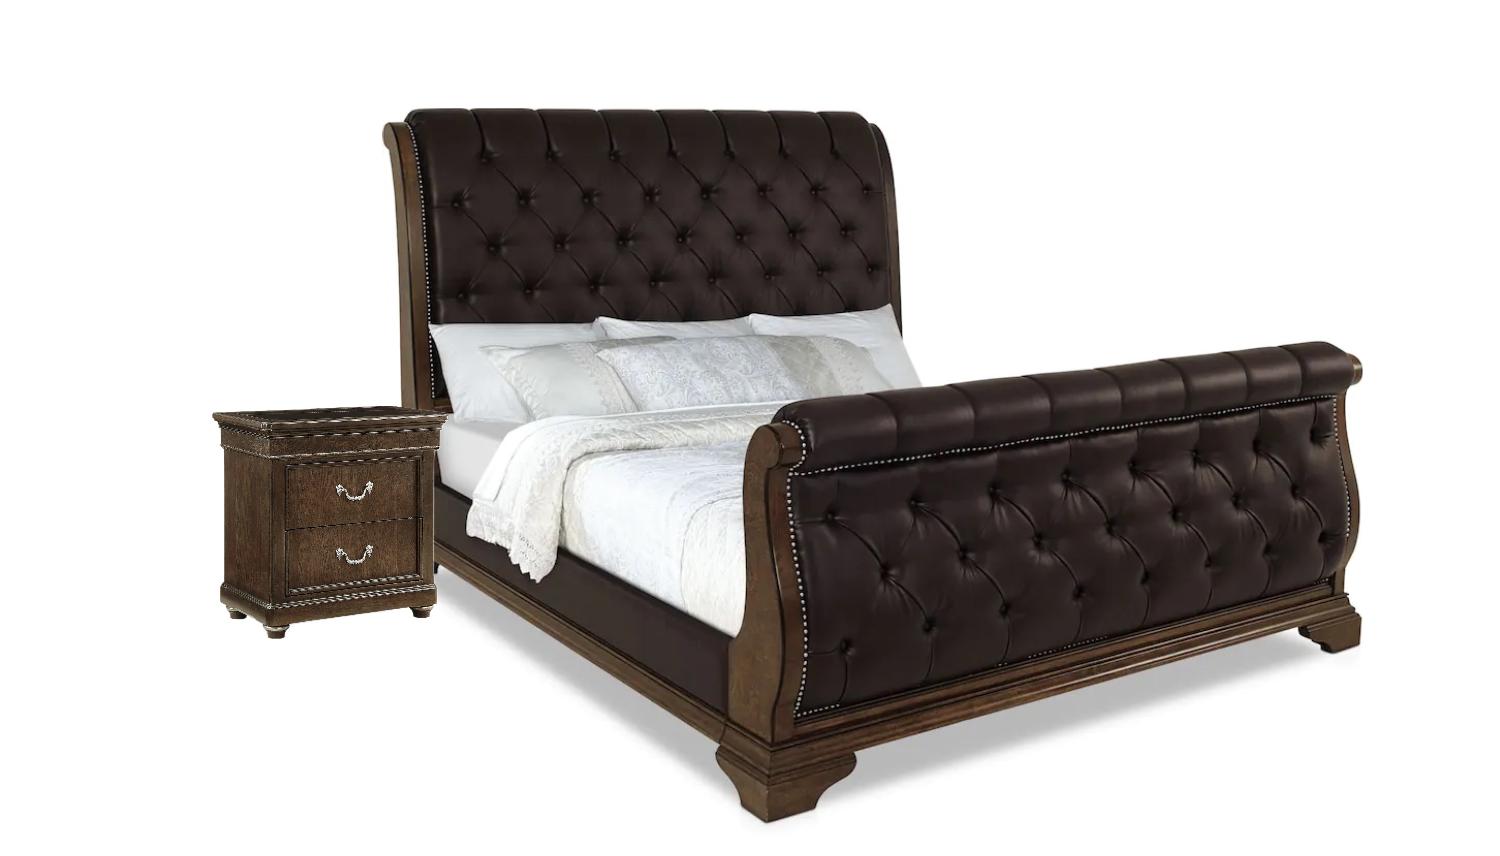 Modern, Transitional Sleigh Bedroom Set Belmont Mahogany 275145-2316-BR-2N-3PCS in Brown Fabric